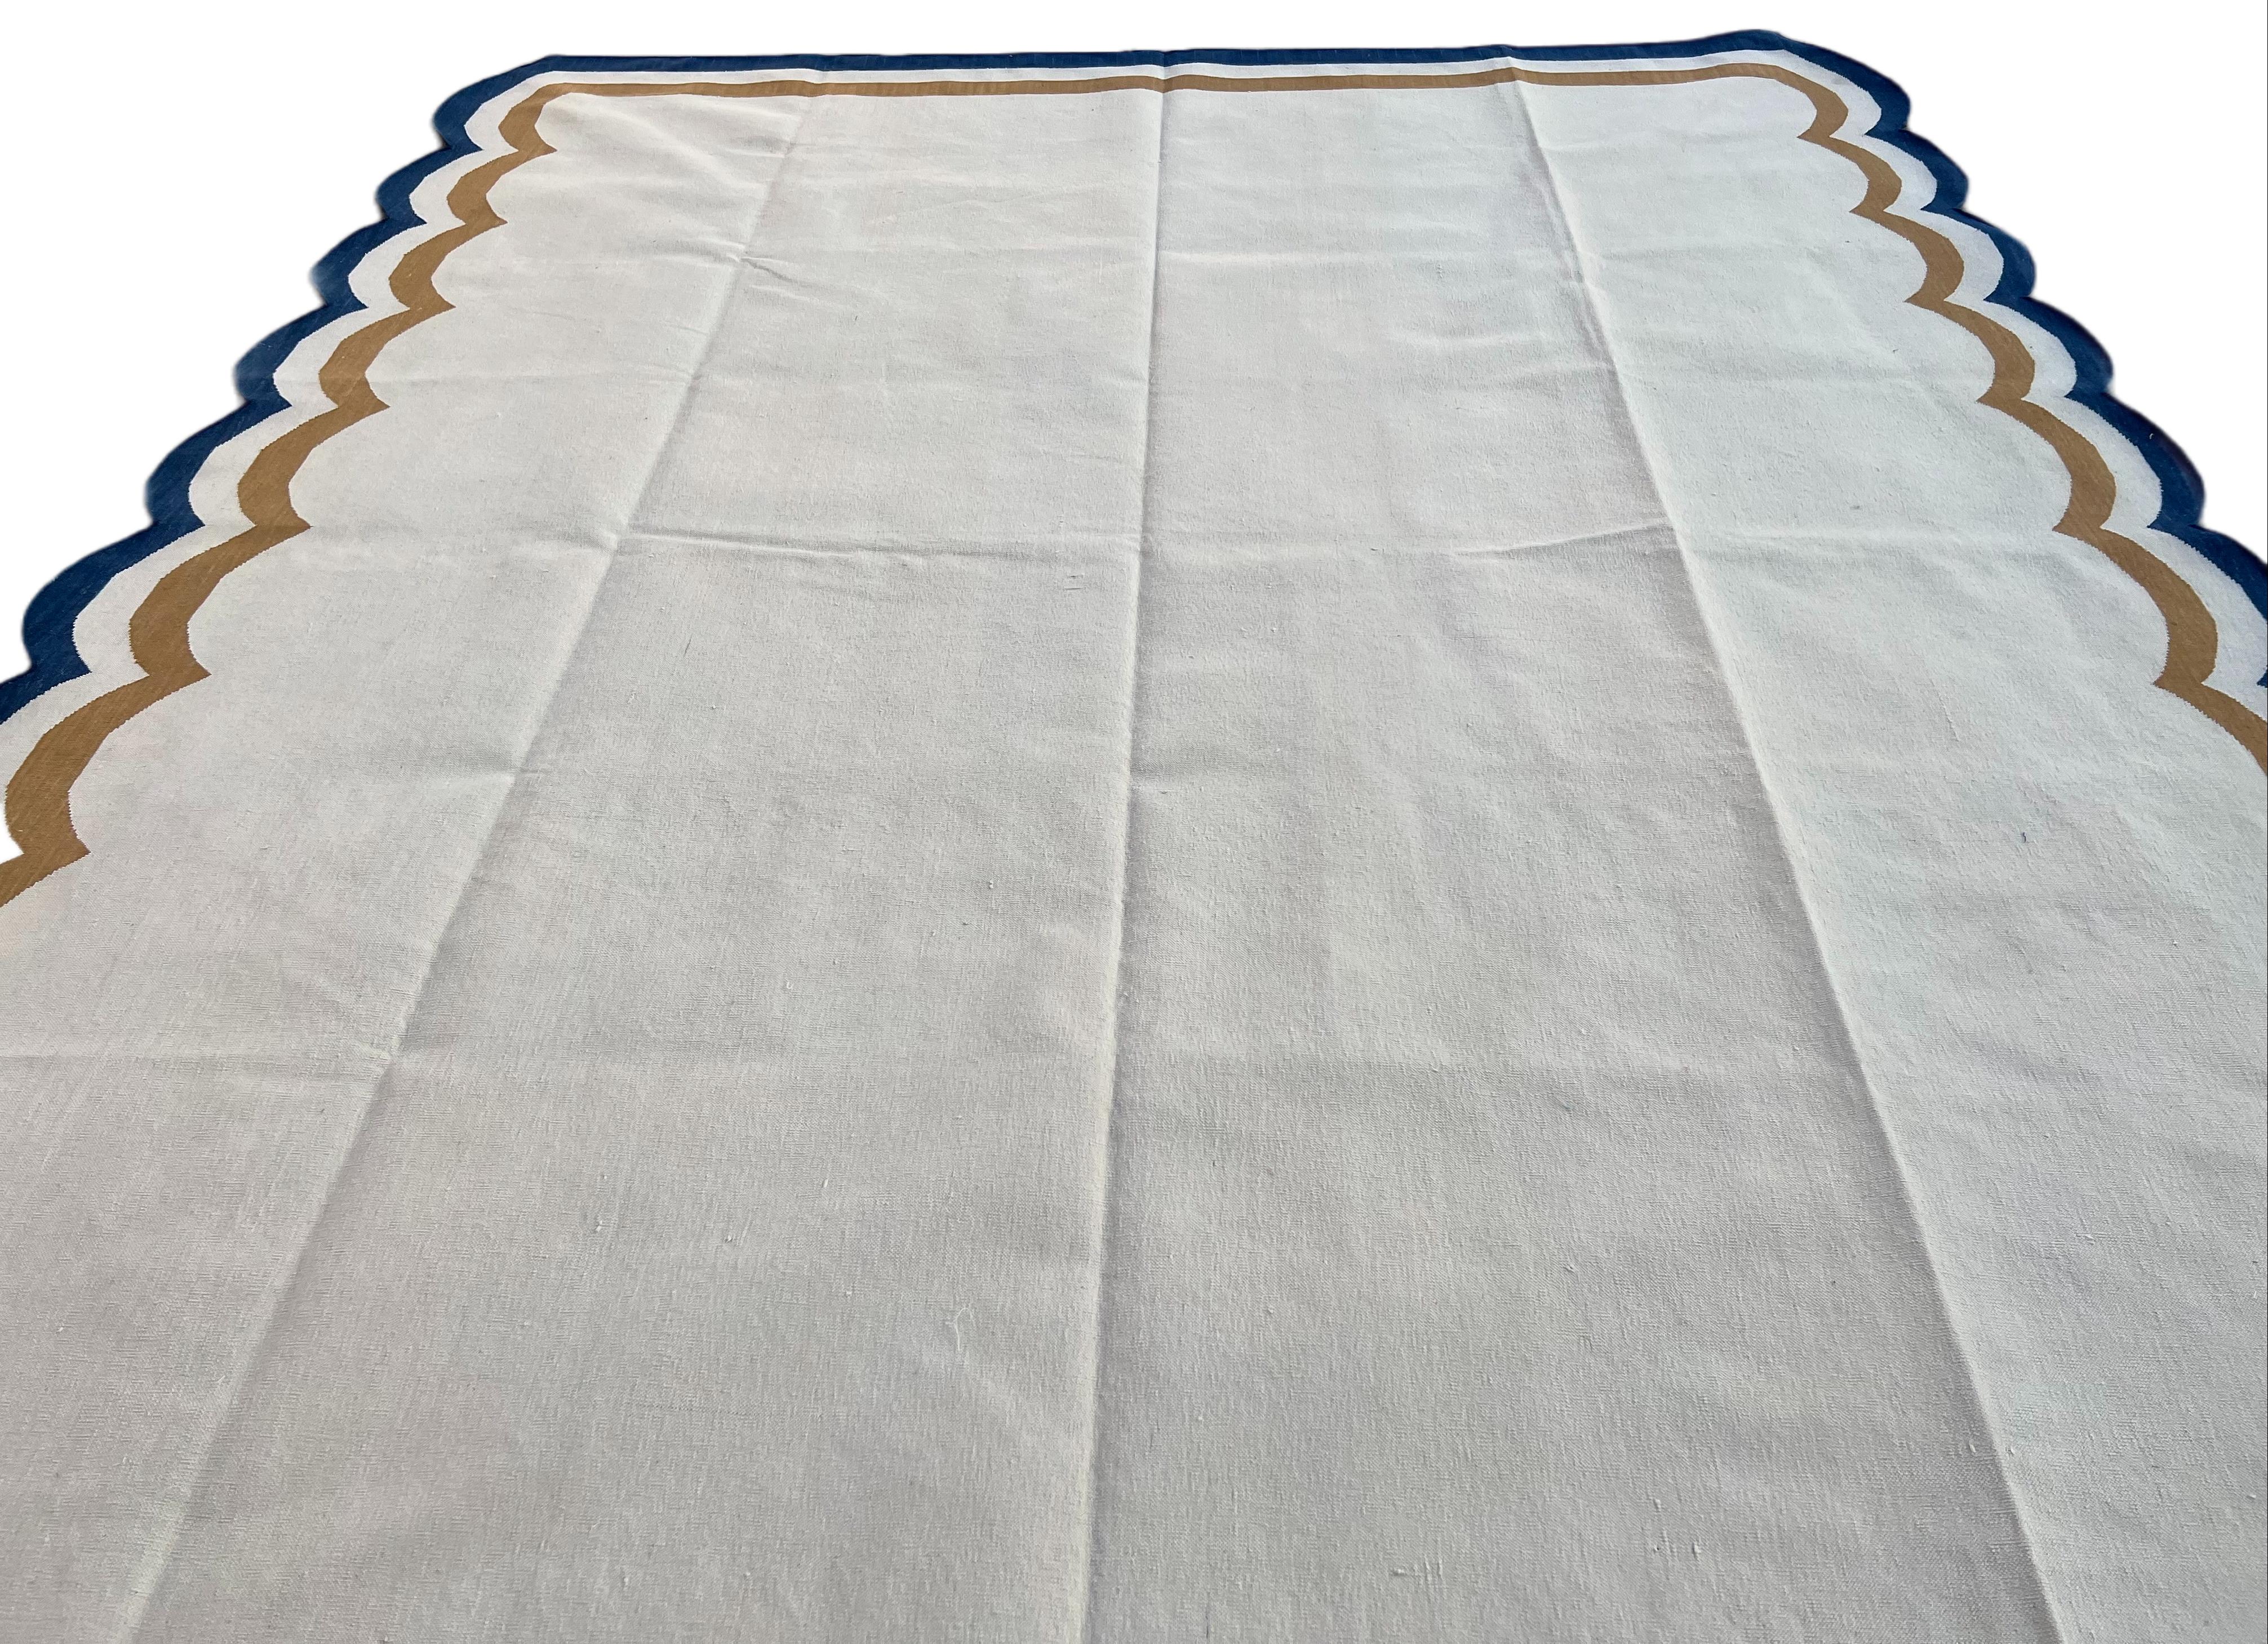 Contemporary Handmade Cotton Area Flat Weave Rug, 8x10 Cream And Blue Scallop Striped Dhurrie For Sale